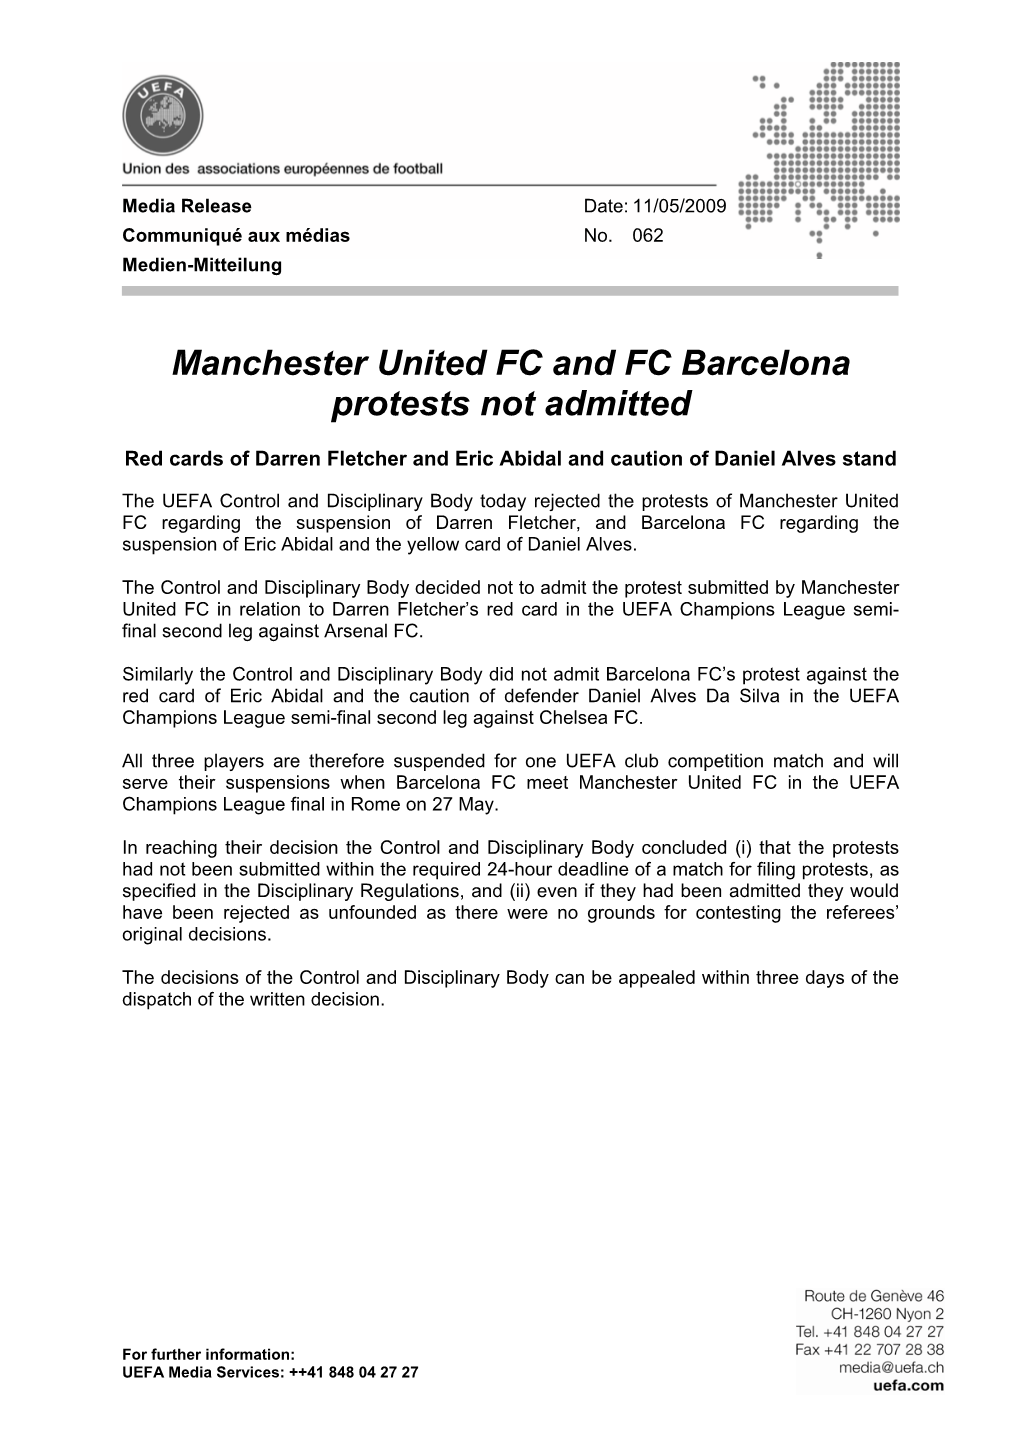 Manchester United FC and FC Barcelona Protests Not Admitted